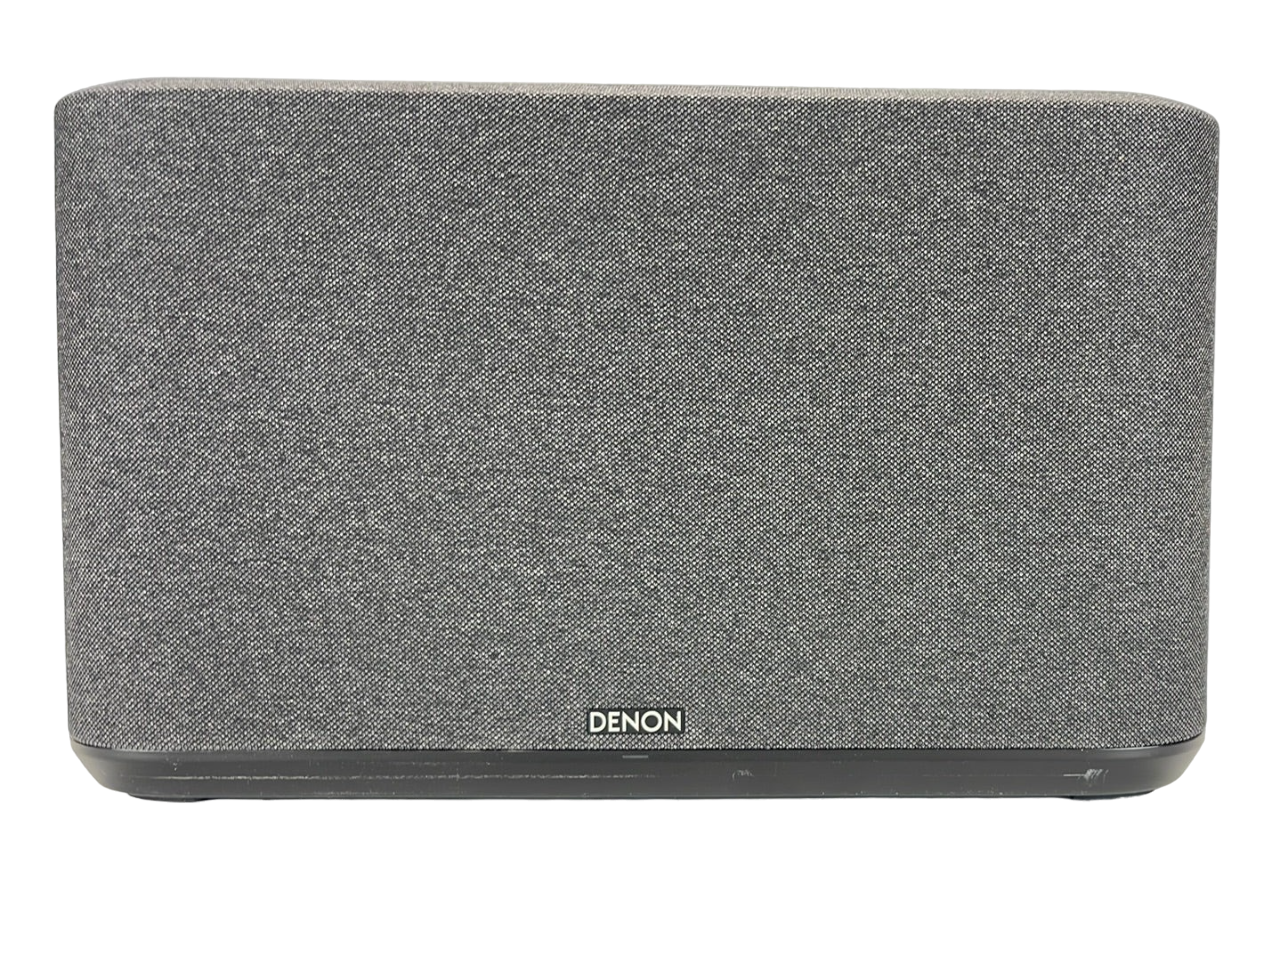 Denon Home 350 Wireless Smart Speaker | HEOS Built-in, AirPlay 2, and Bluetooth